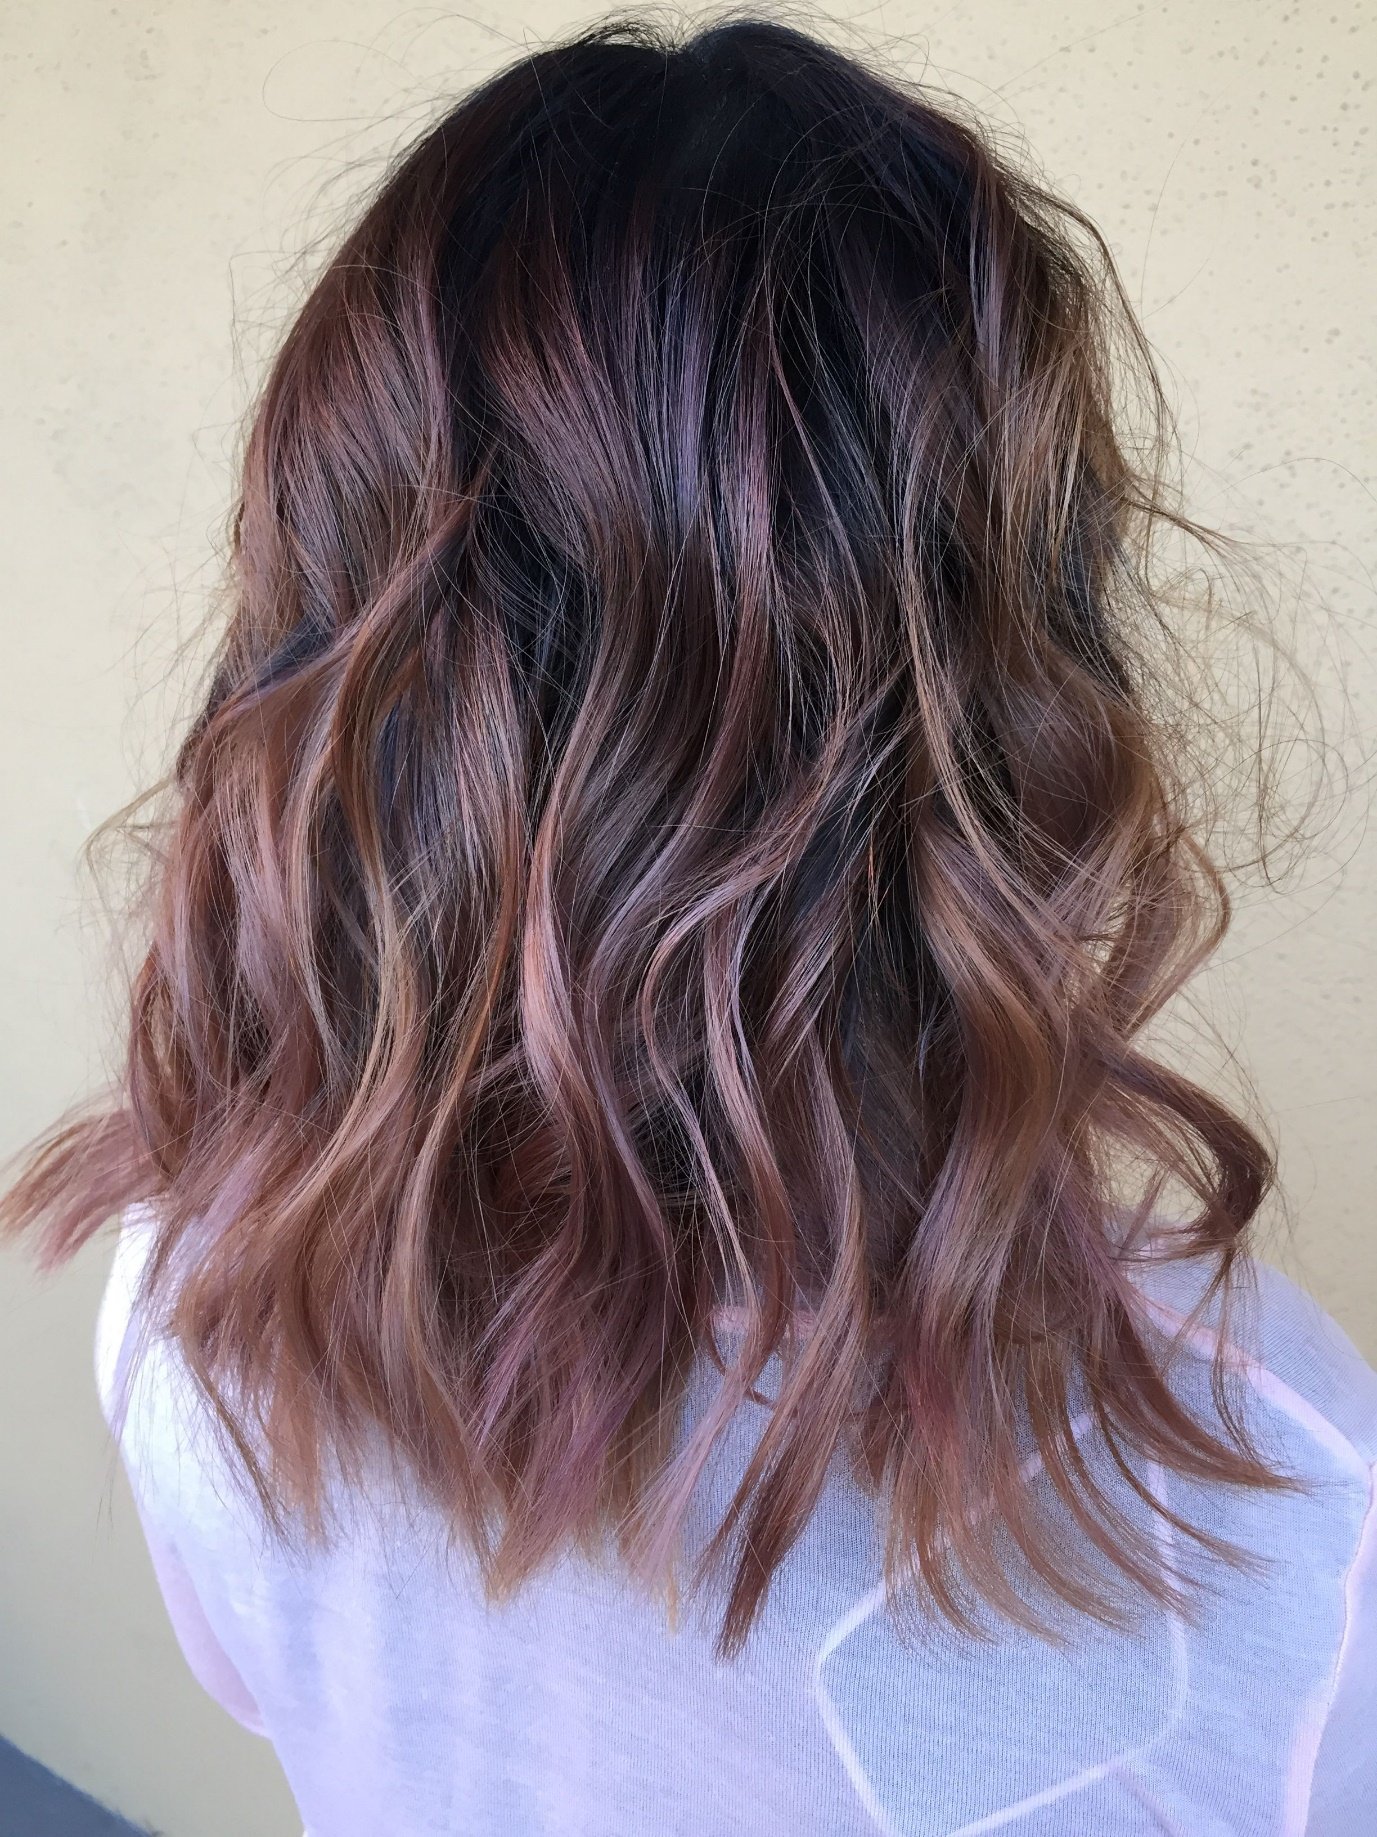 Dusty rose gold balayage on @d.lushus by Allison Gregg at Rockin ...